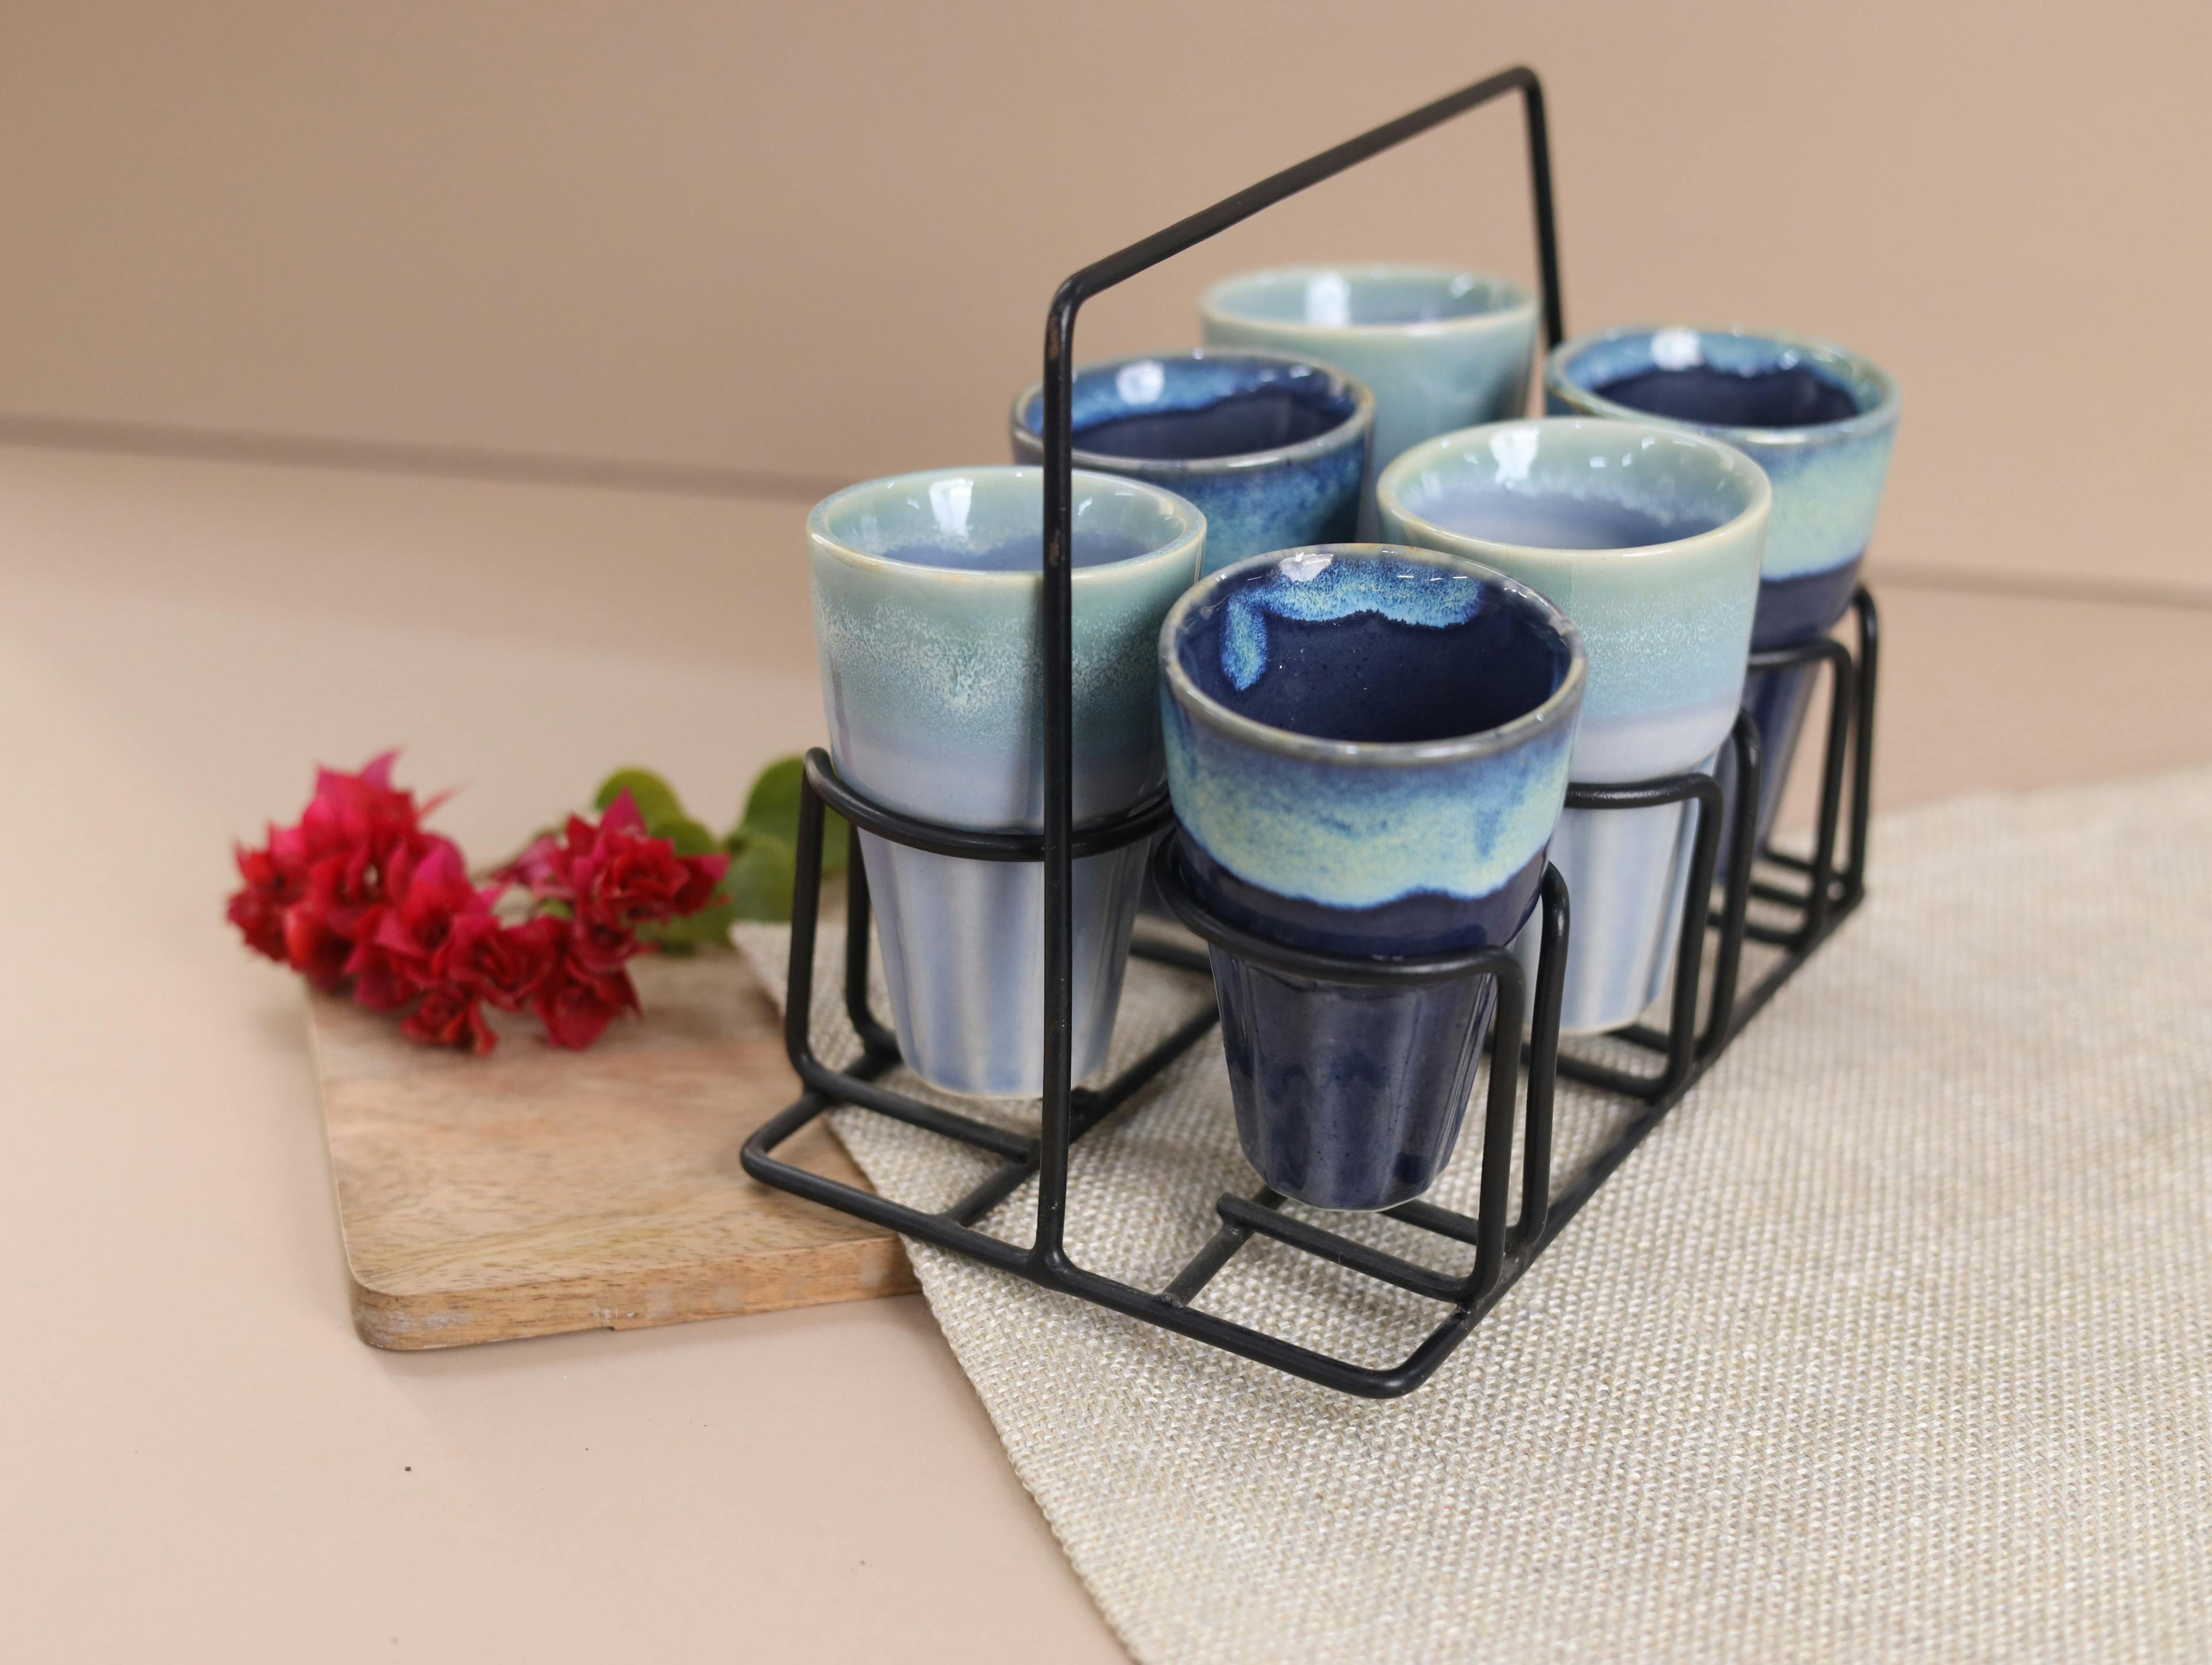 6 Chai Glasses with Stand - Light blue and dark blue, a product by Olive Home accent